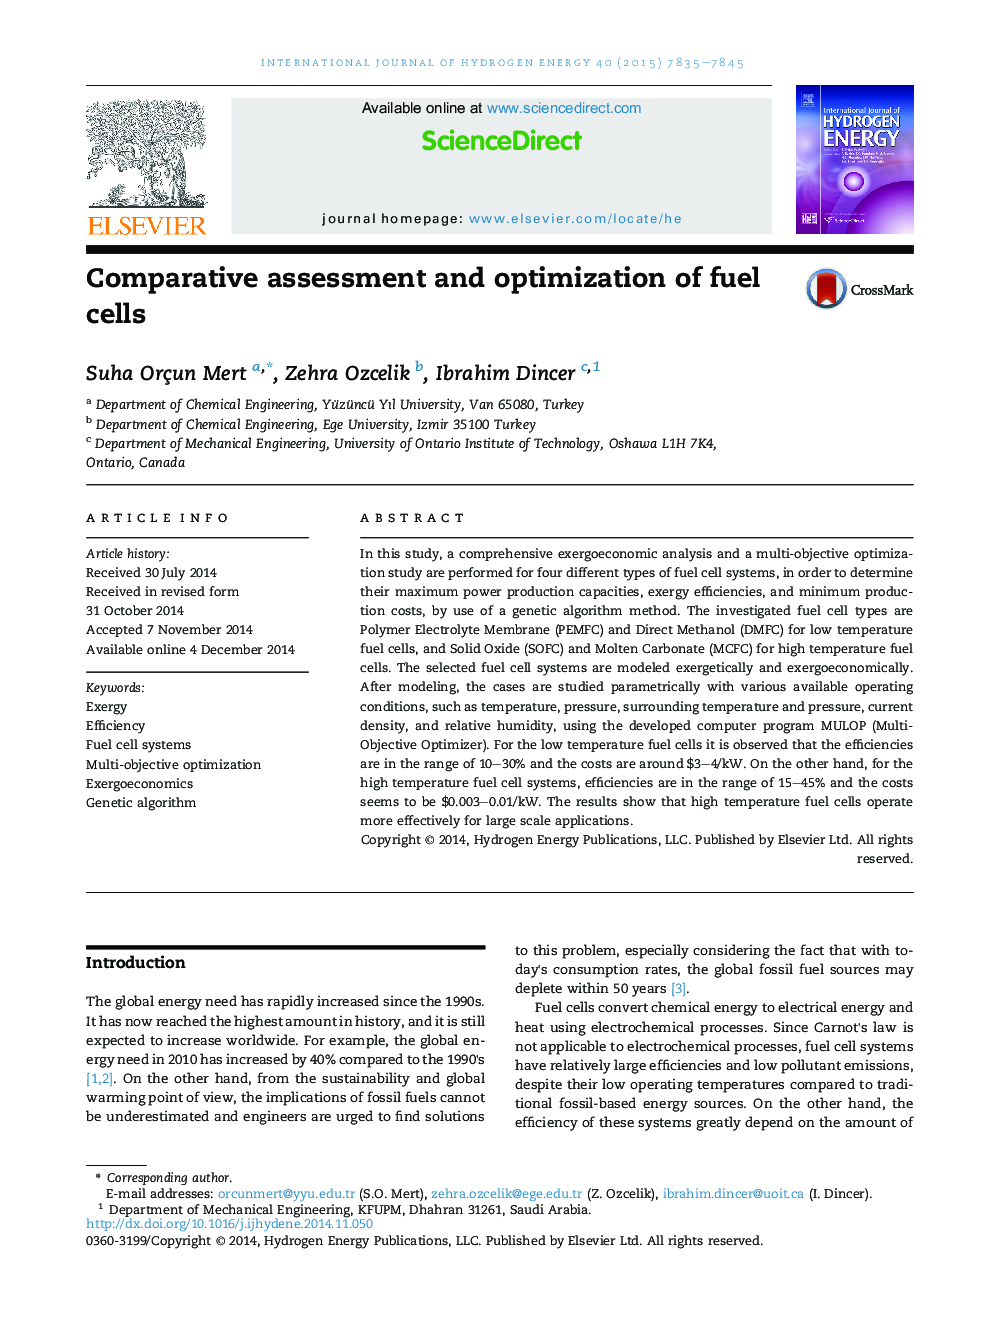 Comparative assessment and optimization of fuel cells